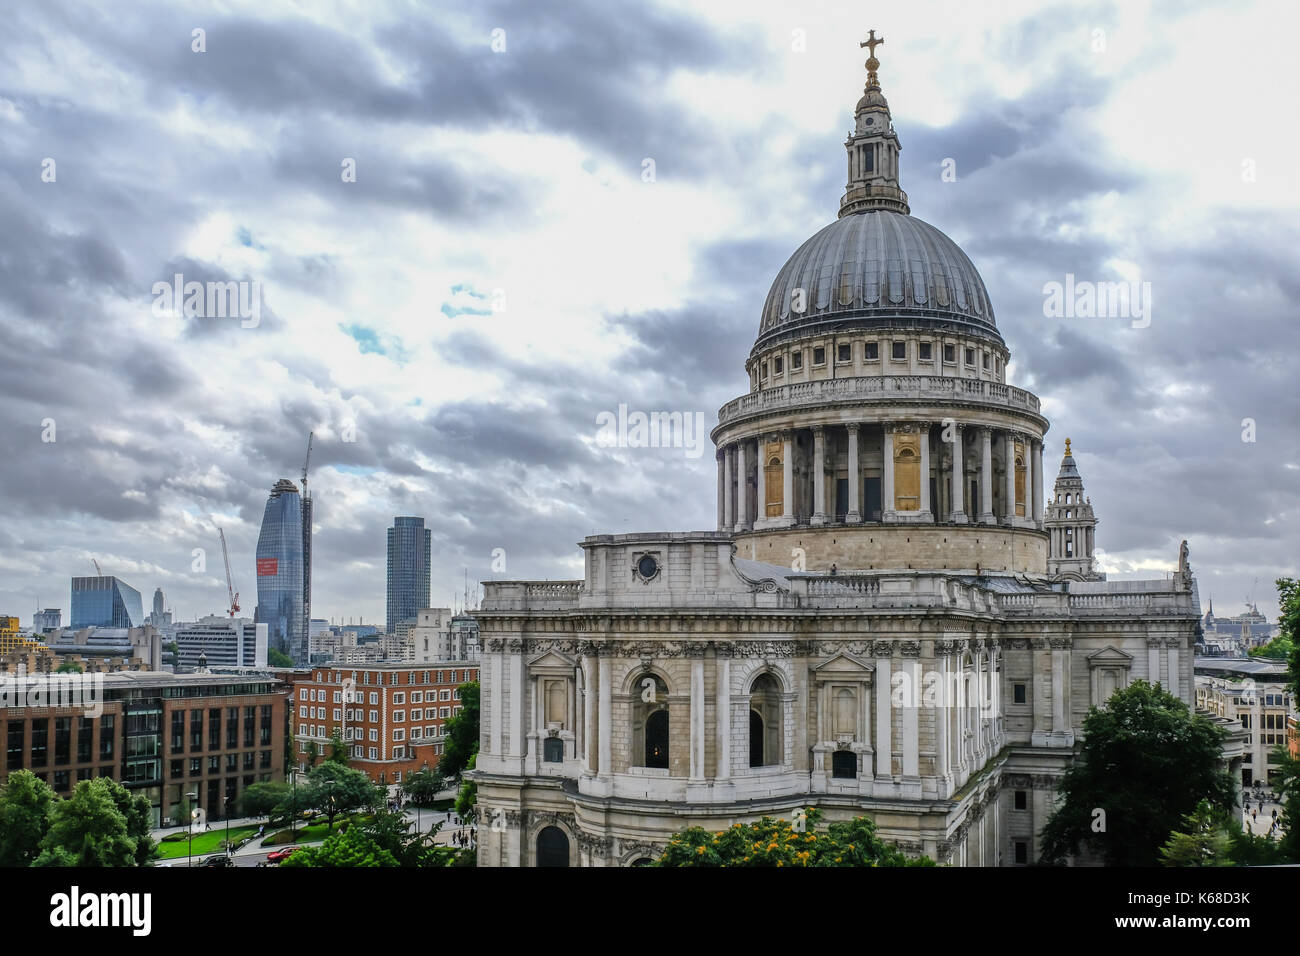 London, UK - August 3, 2017:  St. Paul's Cathederal view from the top of 1 New Change.  An afternoon shot with a cloudy skyline. Stock Photo